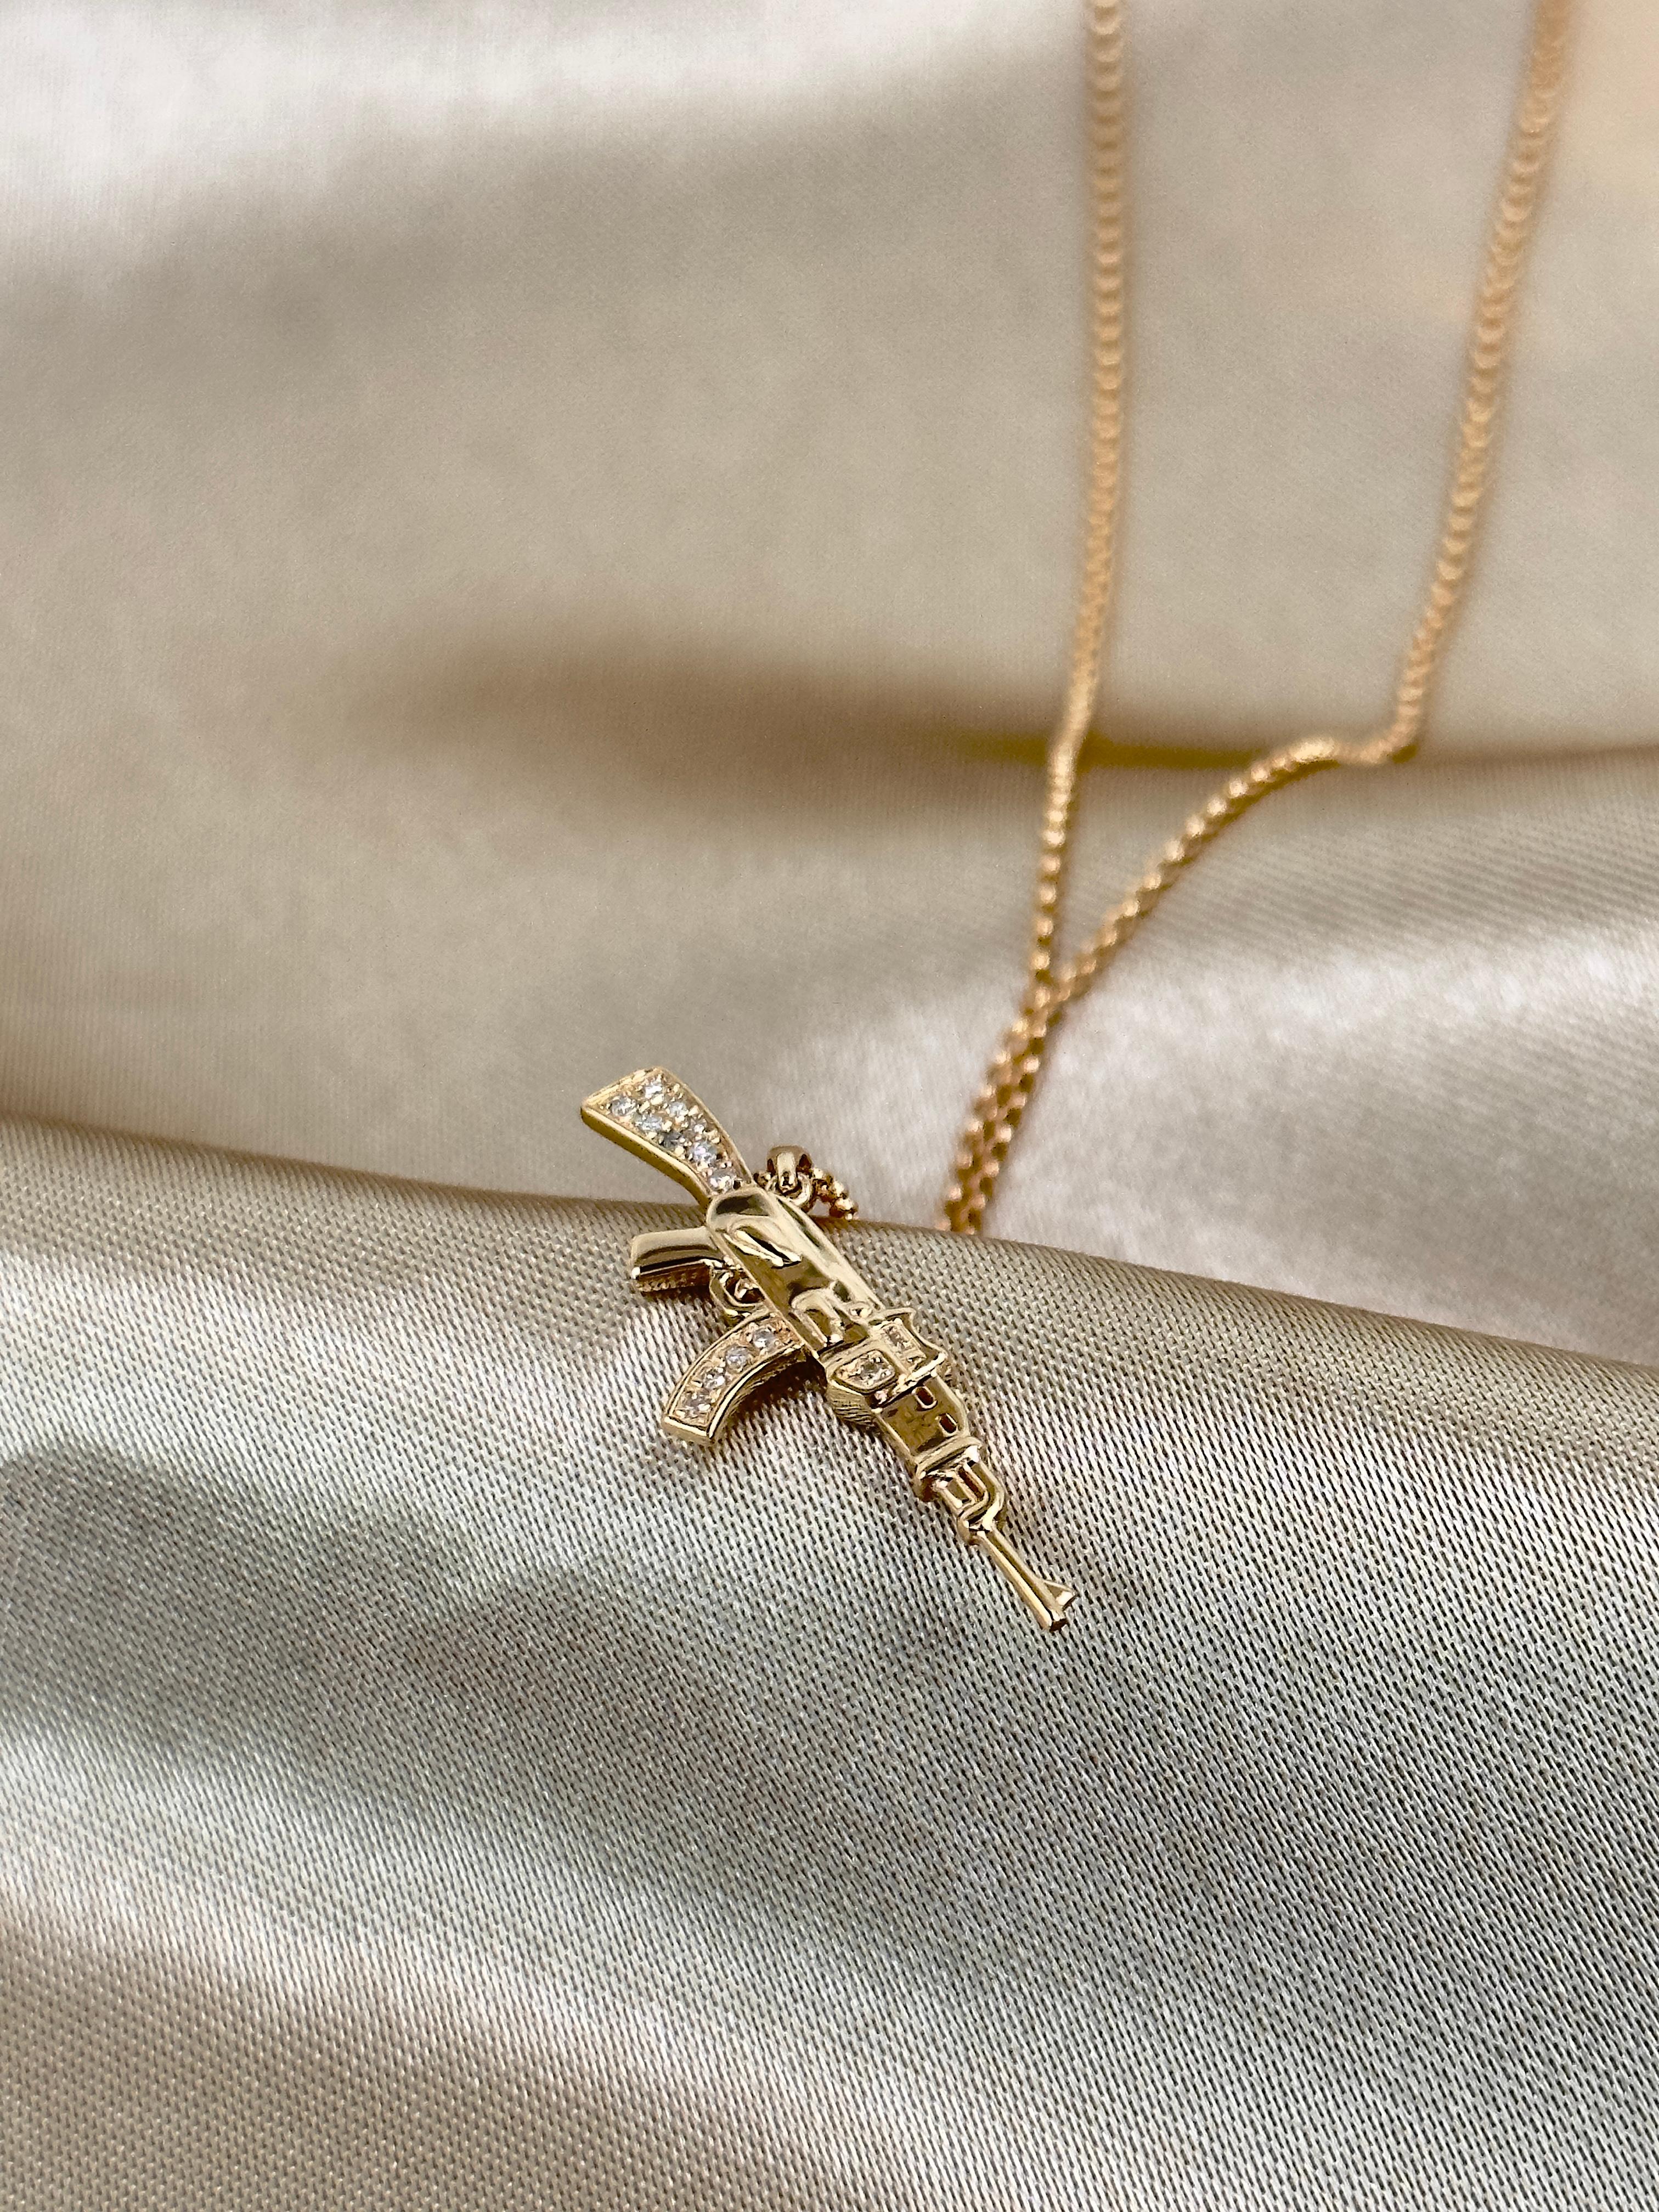 14k gold Diamond gun necklace

** Each item sold separately **

This collection is crafted in 14k solid yellow gold with natural Diamonds. Looks super cute layered with other necklaces, or worn solo.
The chain can be adjusted from 14-18 inches, so